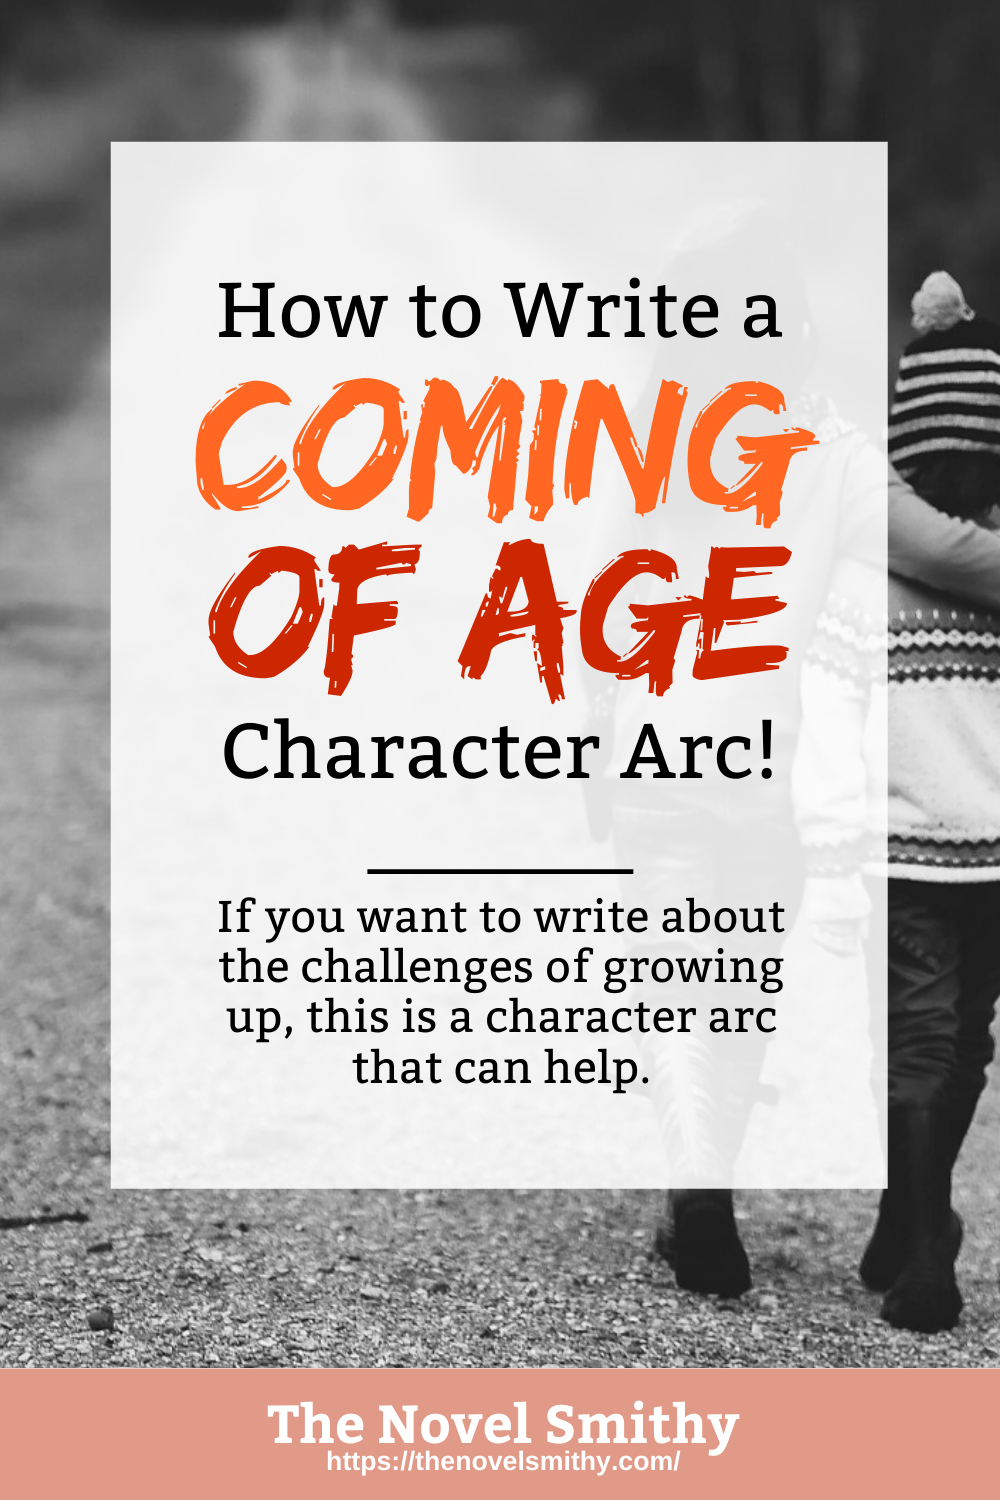 The Coming of Age Character Arc: How to Write About Growing Up